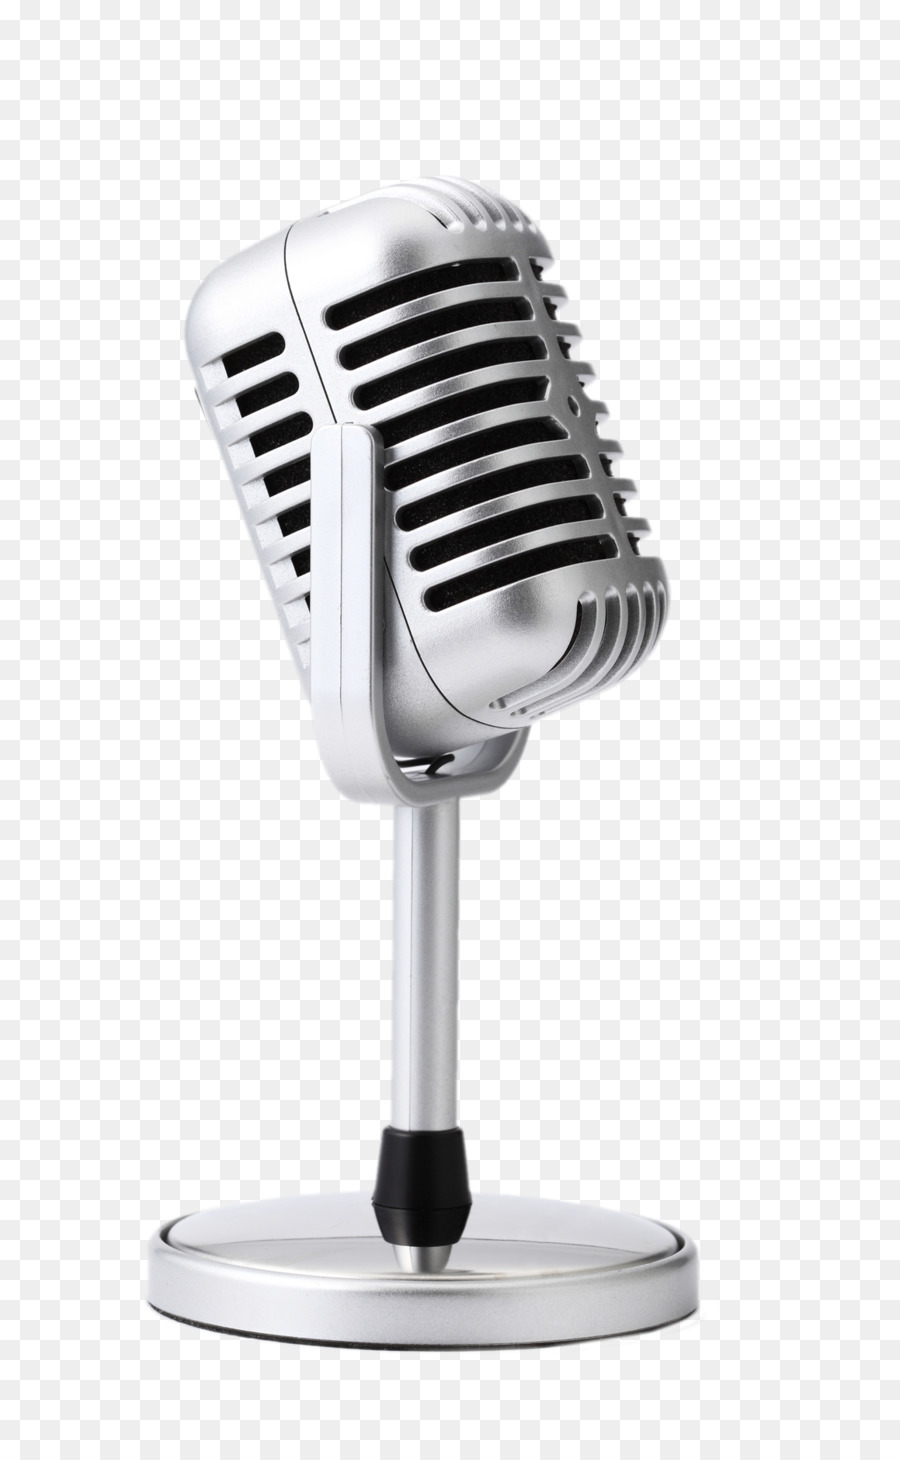 Microphone stand - microphone png download - 1159*1874 - Free Transparent  png Download.